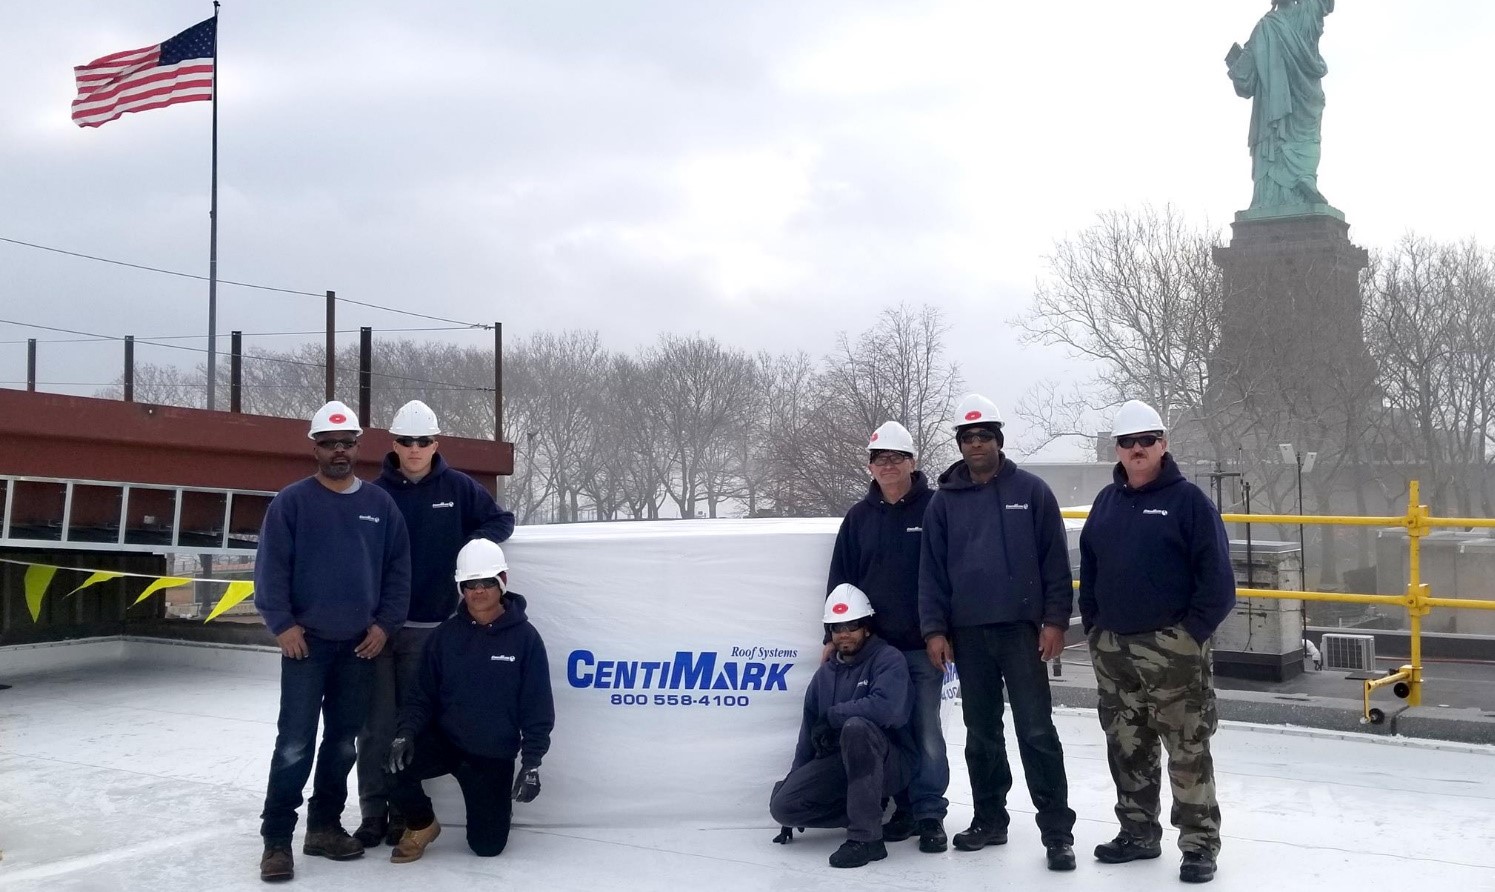 CentiMark team at the job site in New York